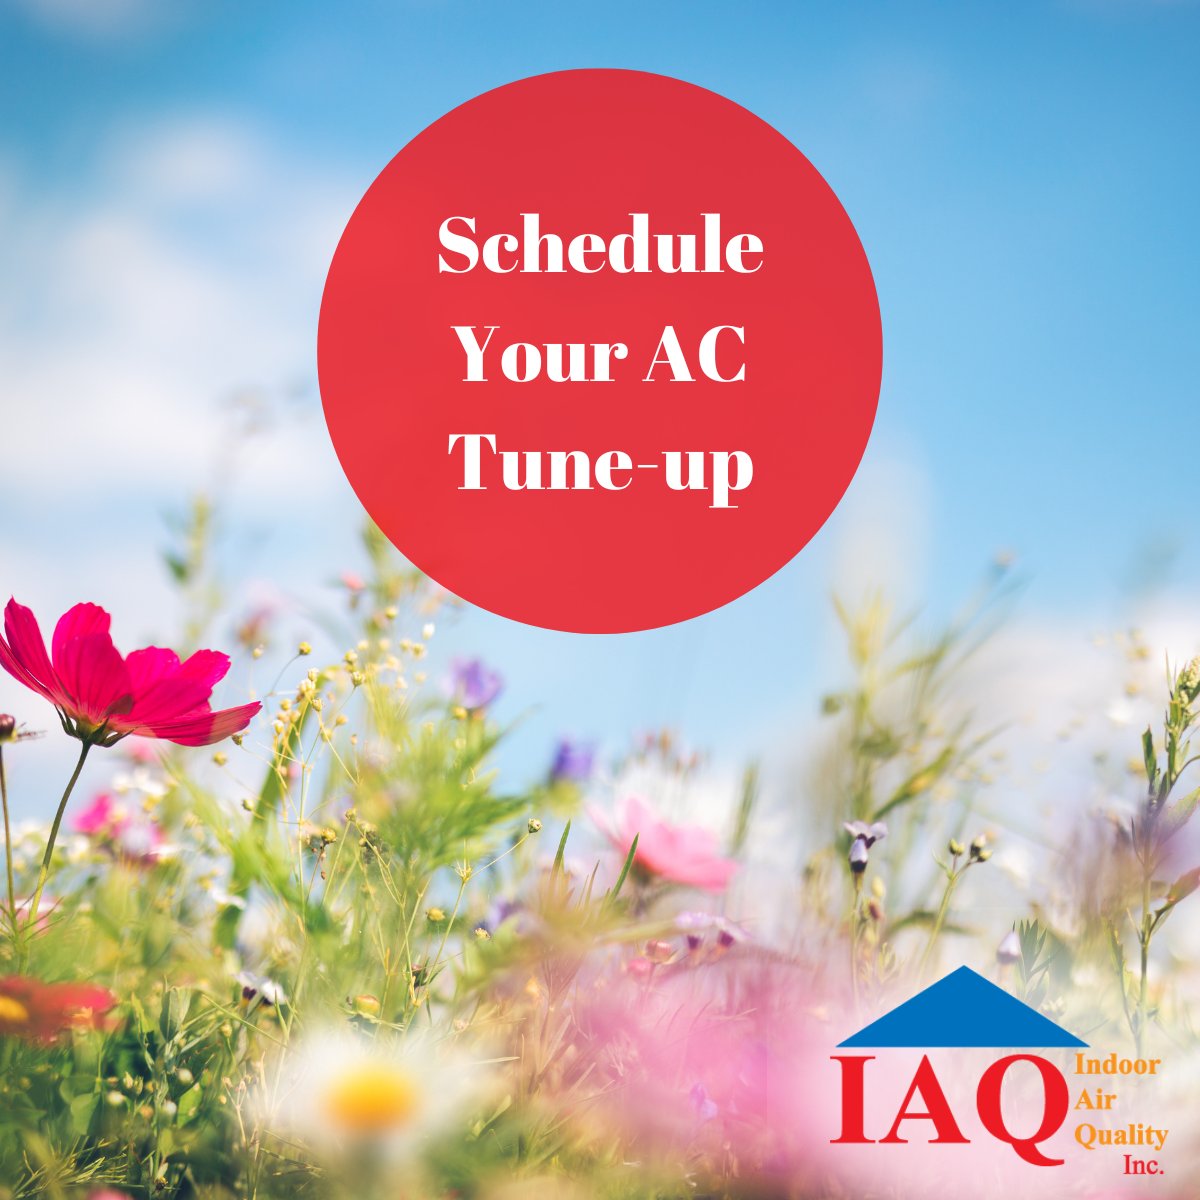 Spring is Here! 

Now is the perfect time to schedule your air conditioner's seasonal tune-up. Indoor Air Quality will make sure your air conditioning system is in tip-top shape for summer!

#HVACcontractors #HVACexperts #HVACcolorado